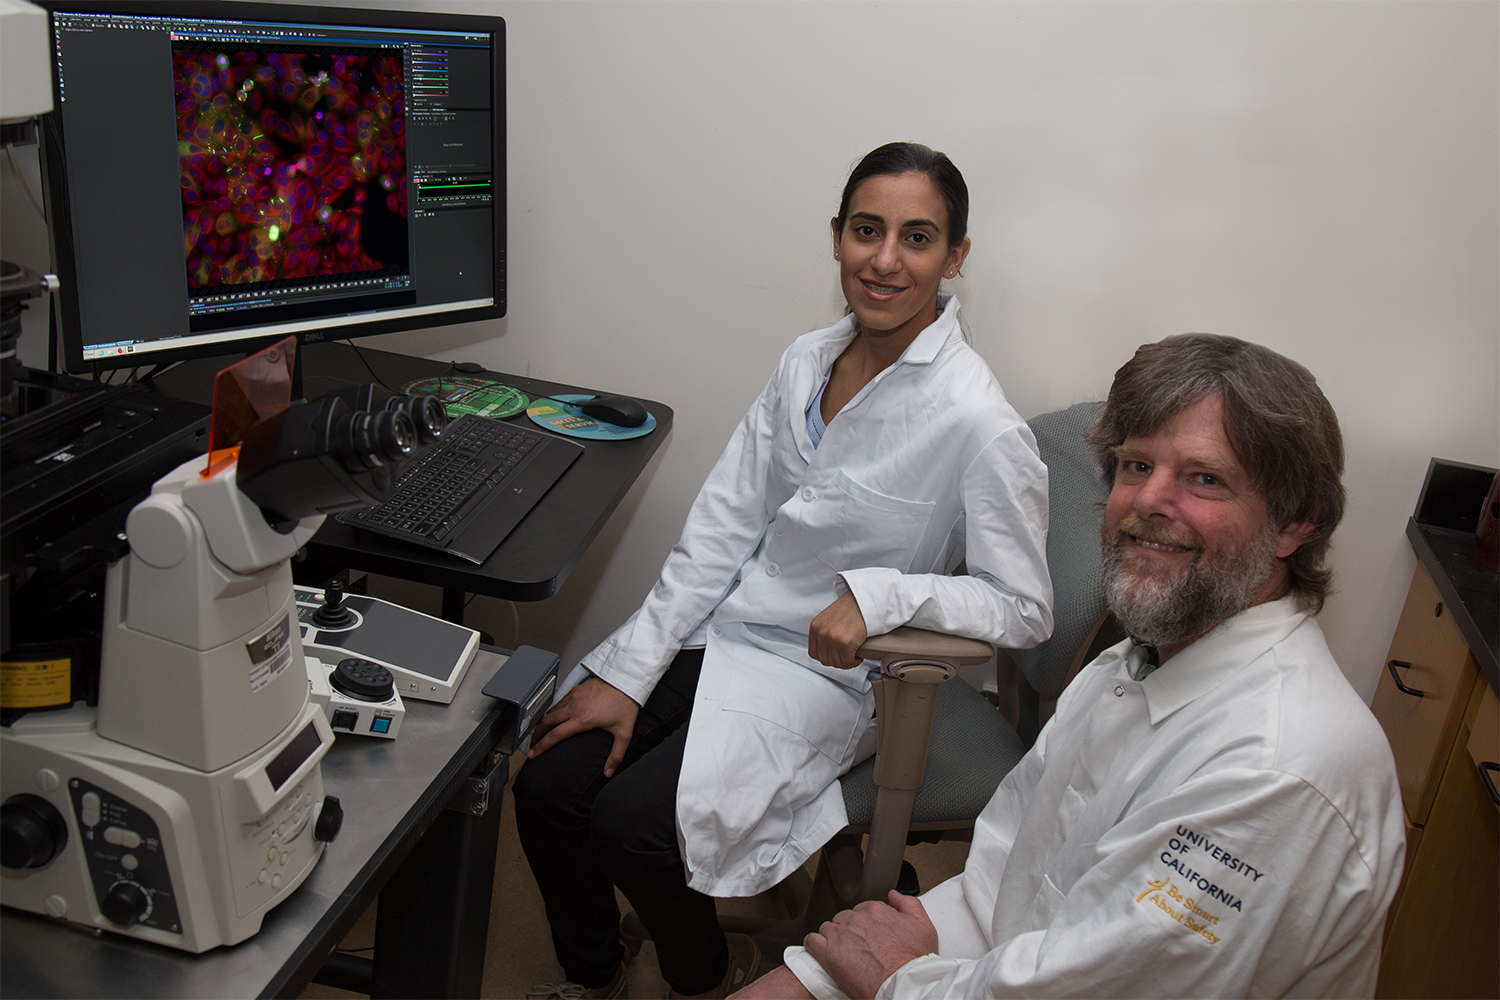 Bita Shahrvini (left) sits next to Assistant Professor Enoch Baldwin (right), who helped Sharhvini further her undergraduate research interest in enzymology, the study of enzymes. David Slipher/UC Davis 